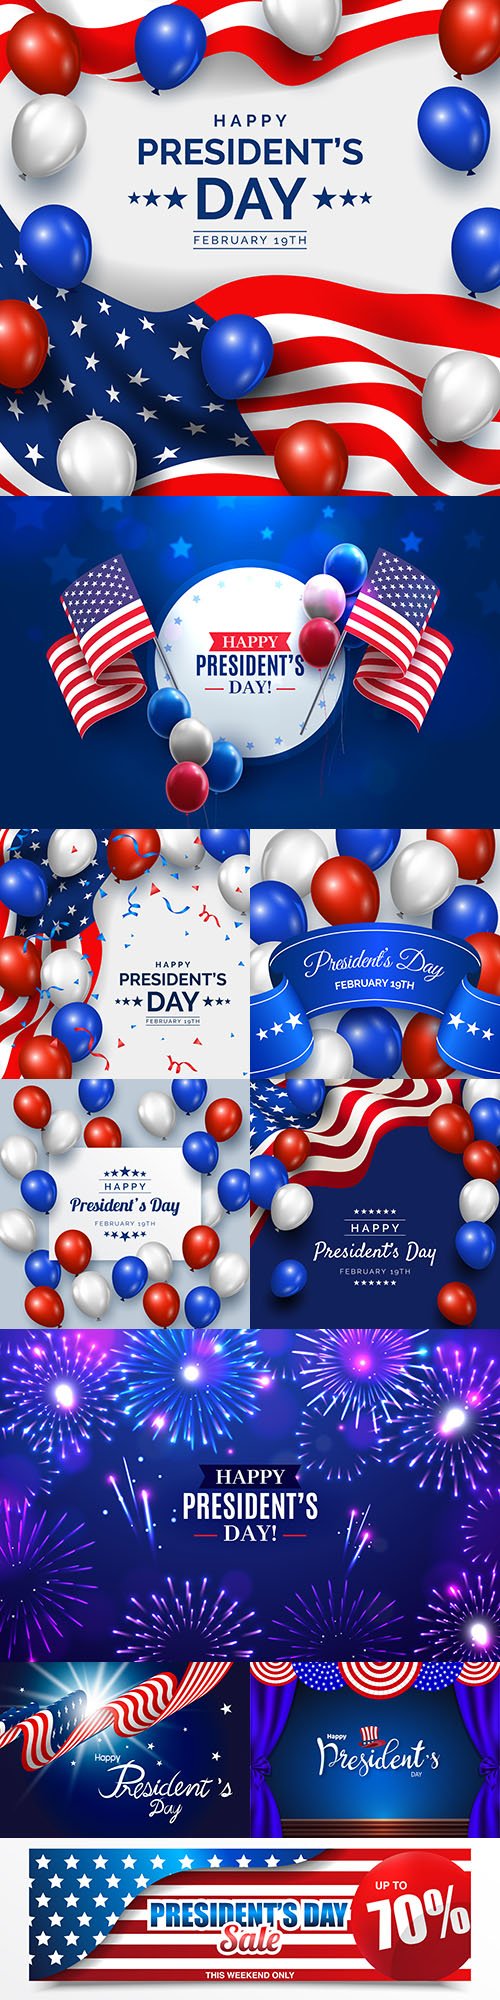 Presidential day with balloons realistic illustrations